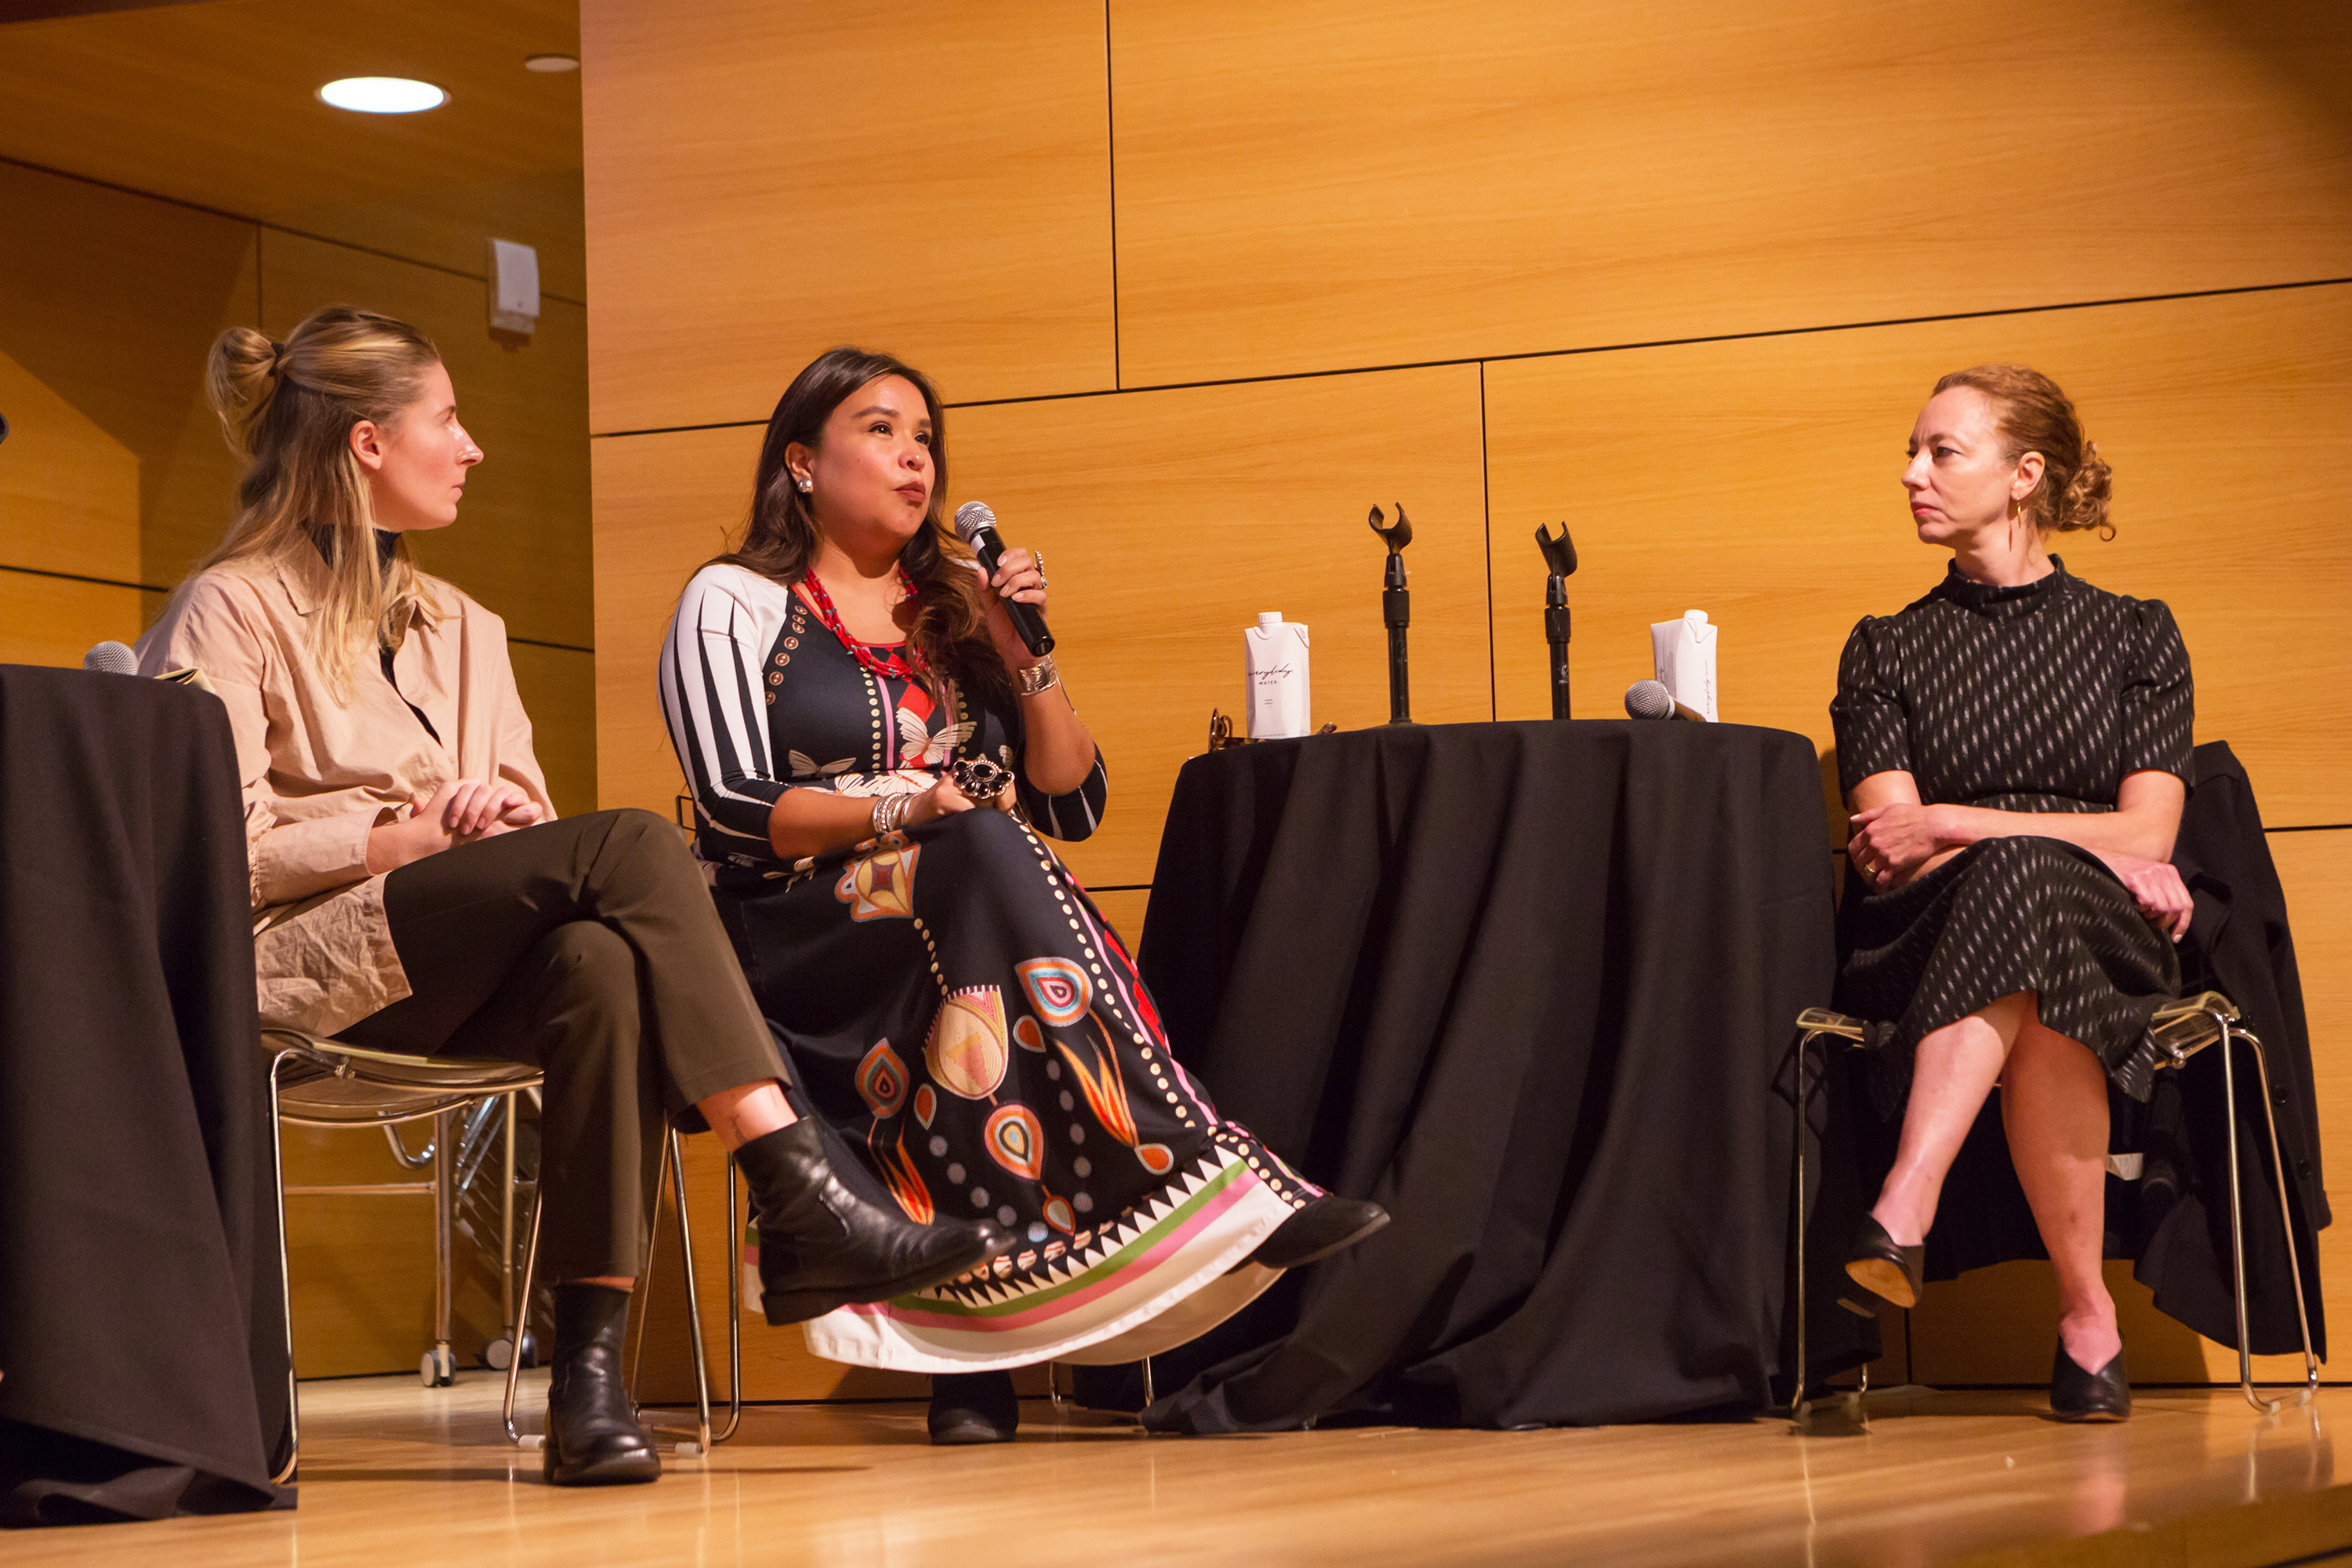 panelists discuss the changing role of museums